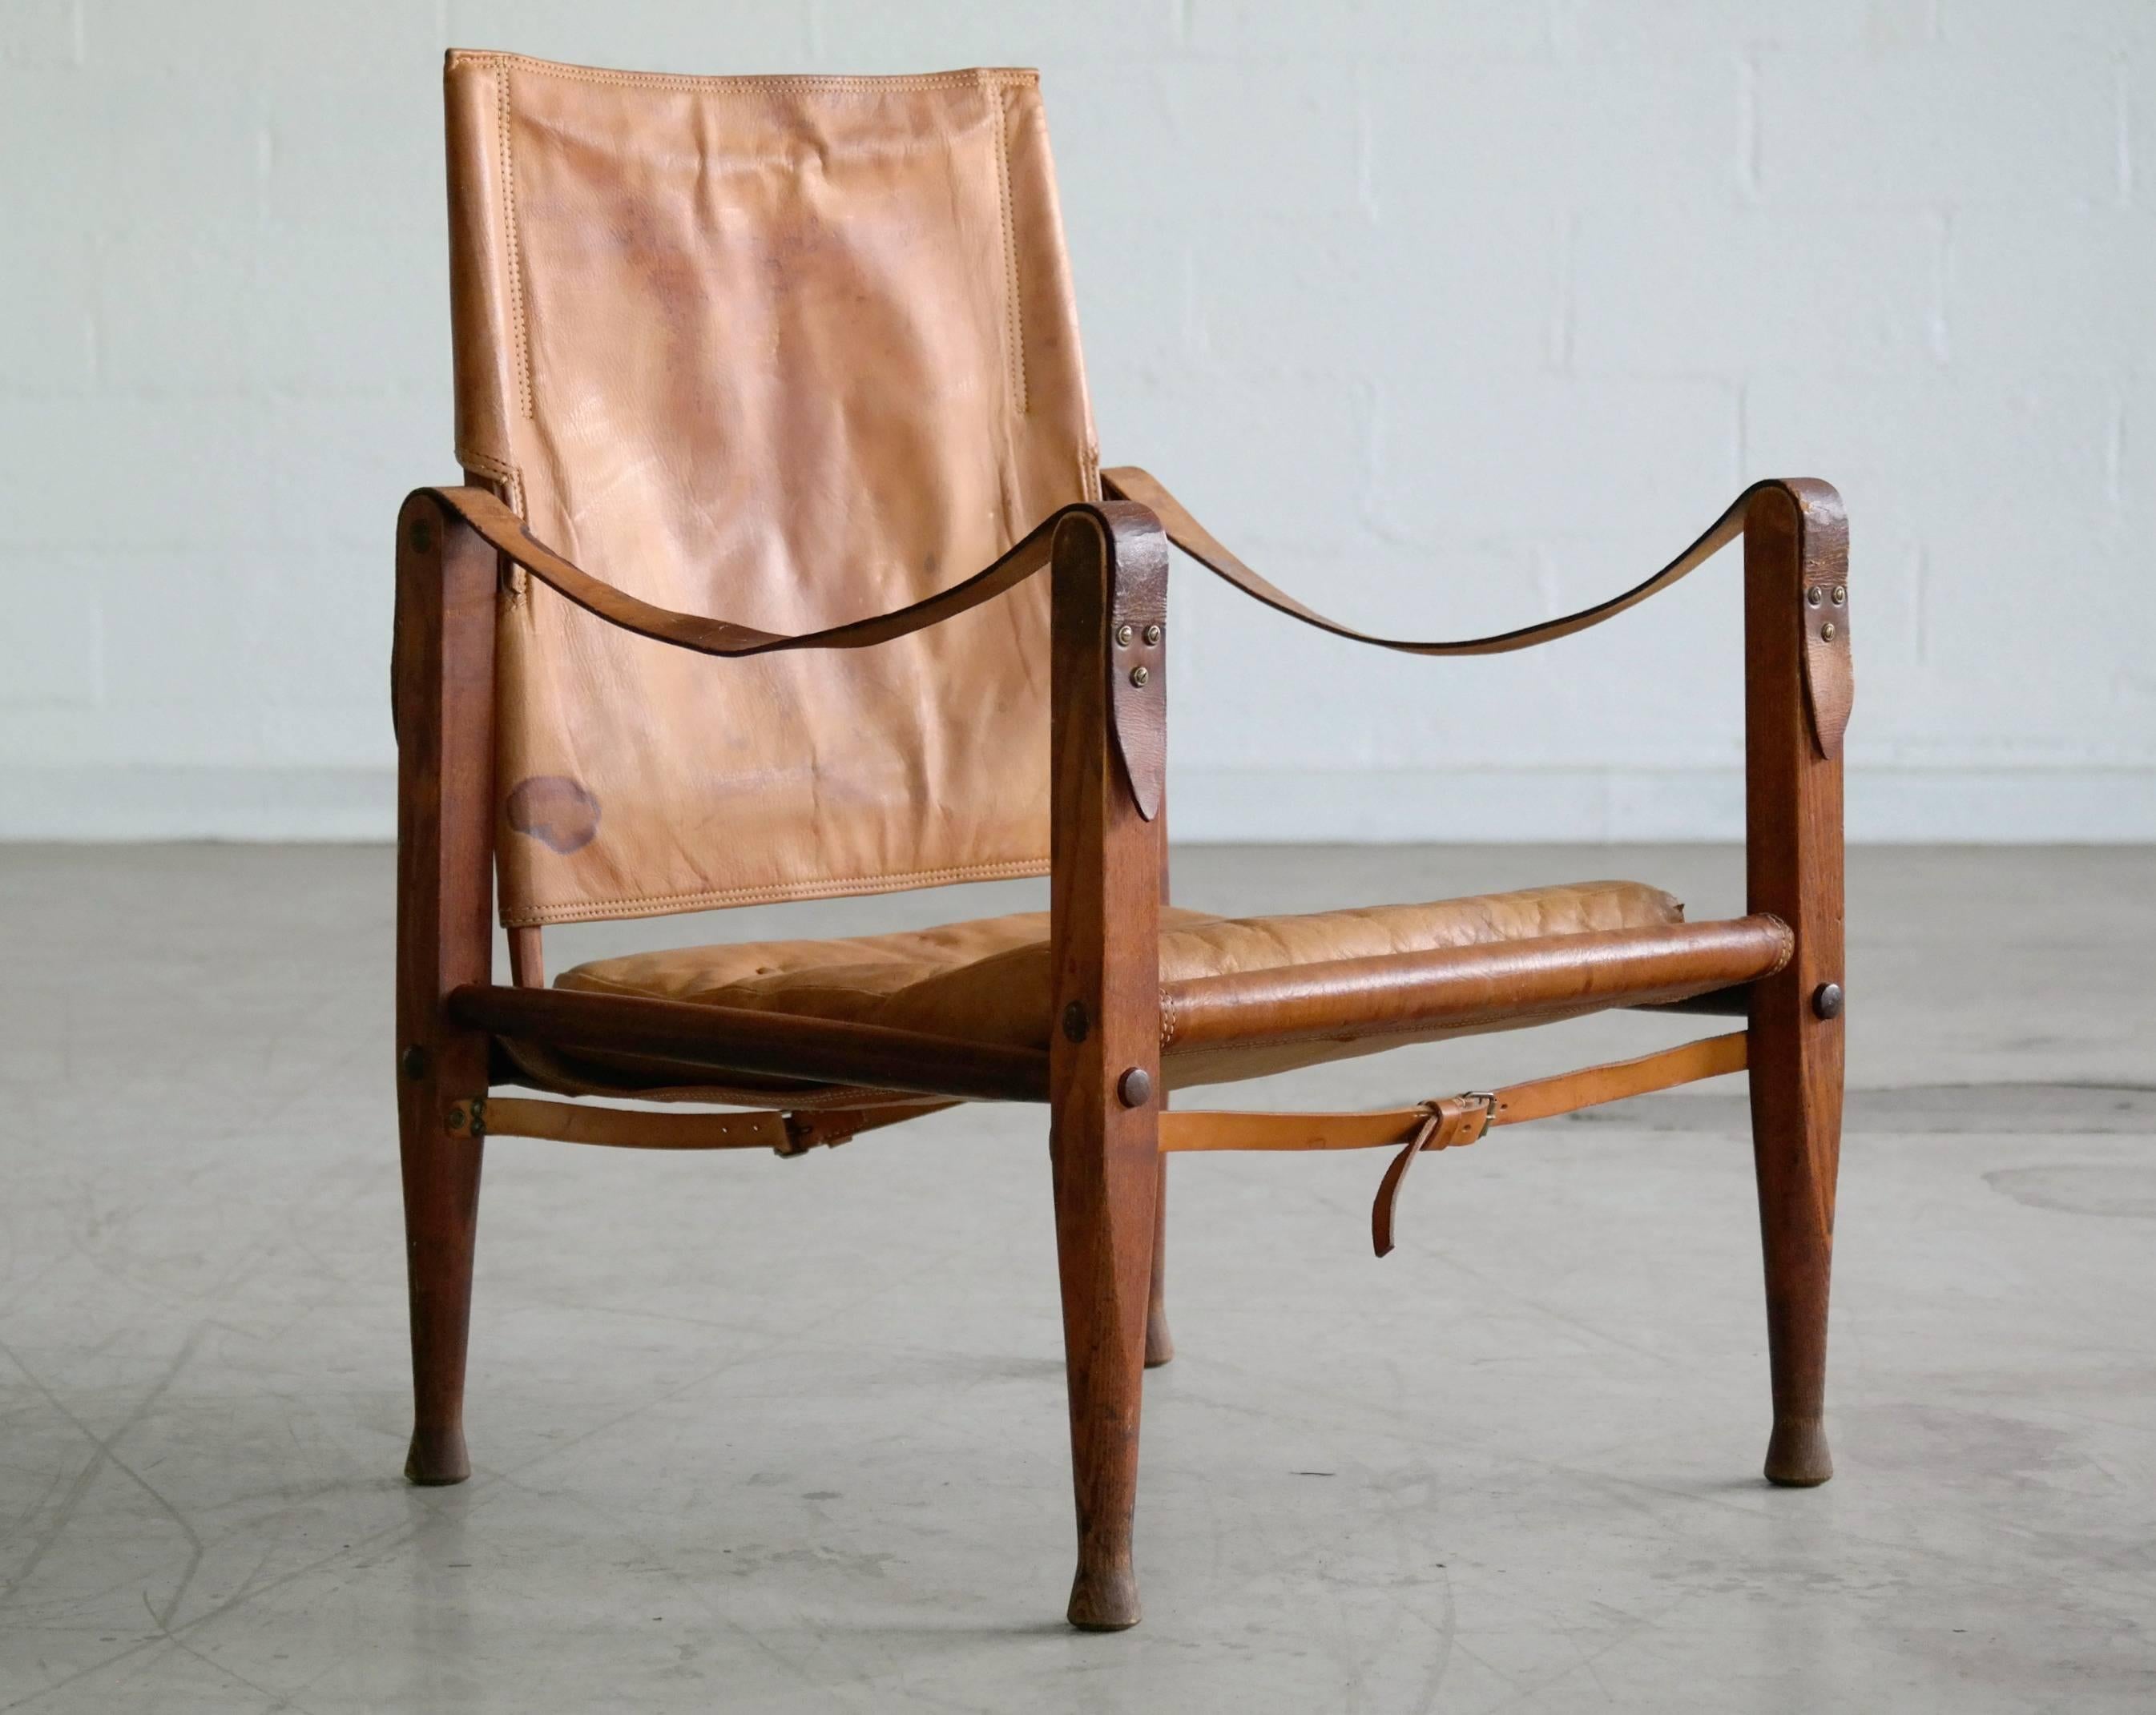 Fabulous original safari chair by the Godfather of all Danish Modern design and manufactured by one the most iconic Master Cabinet Makers. This iconic chair is in good condition. The cognac leather shows an absolute admirable patina and a strong